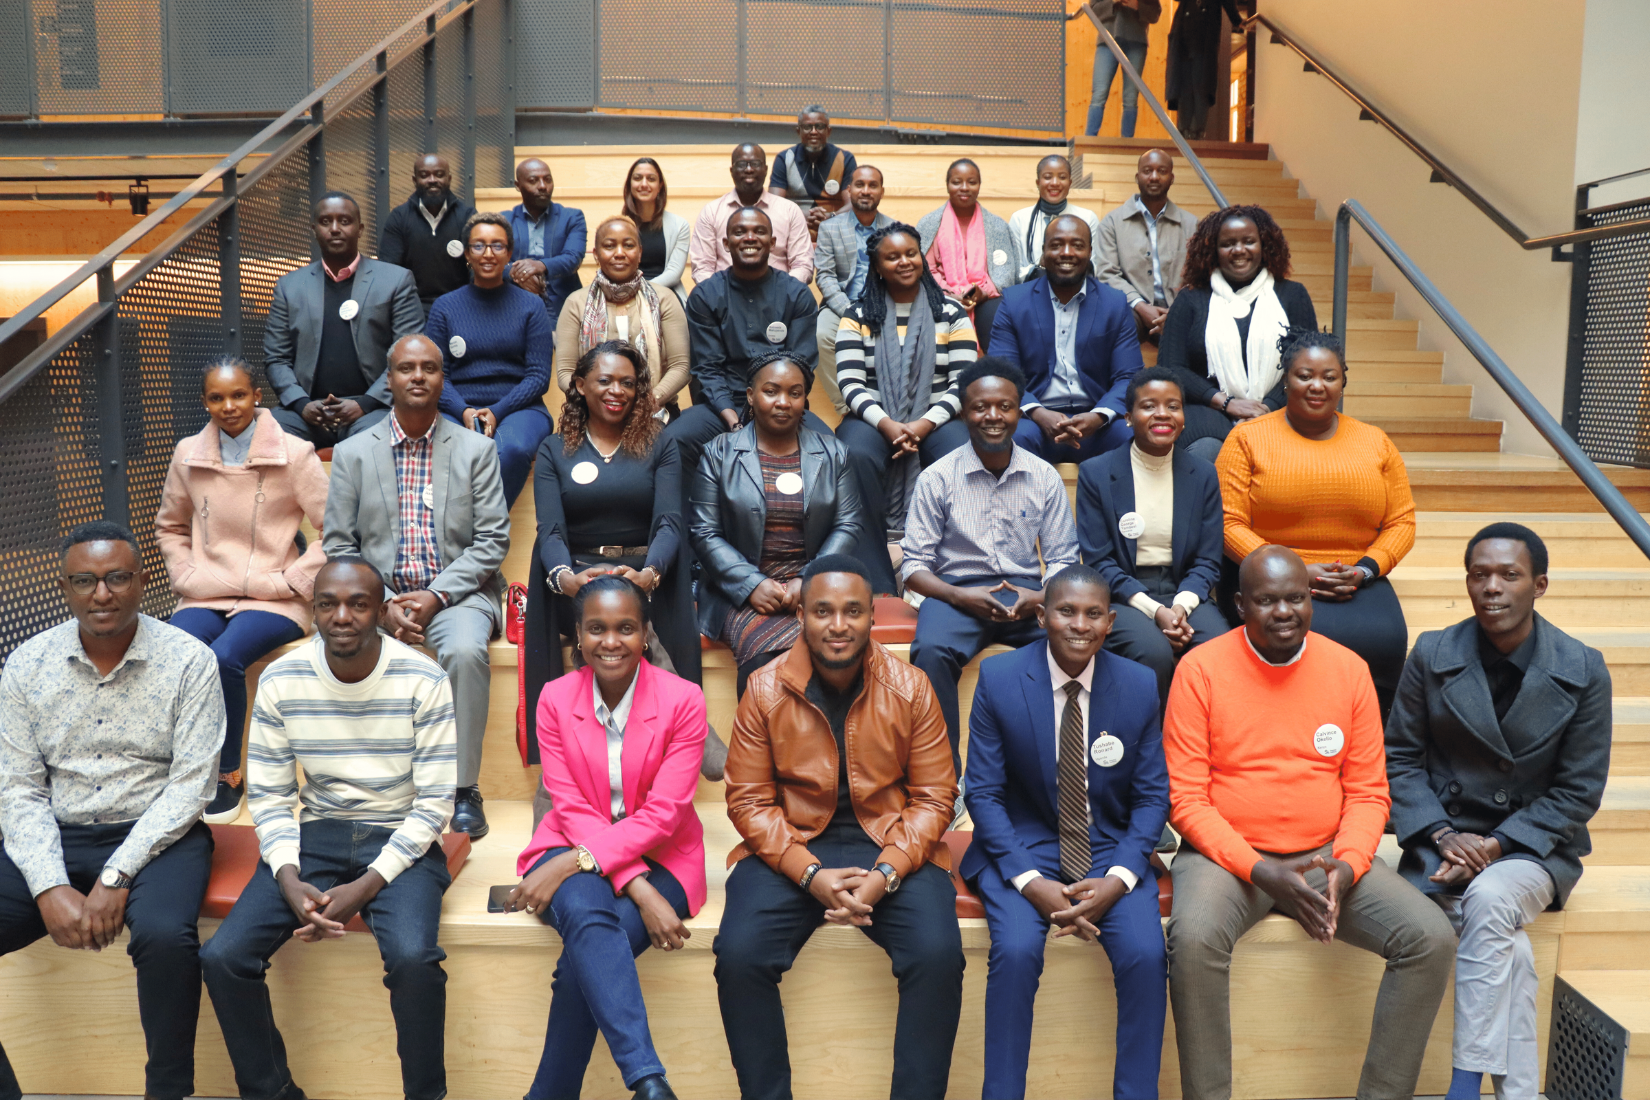 A group photo of 32 African business leaders.